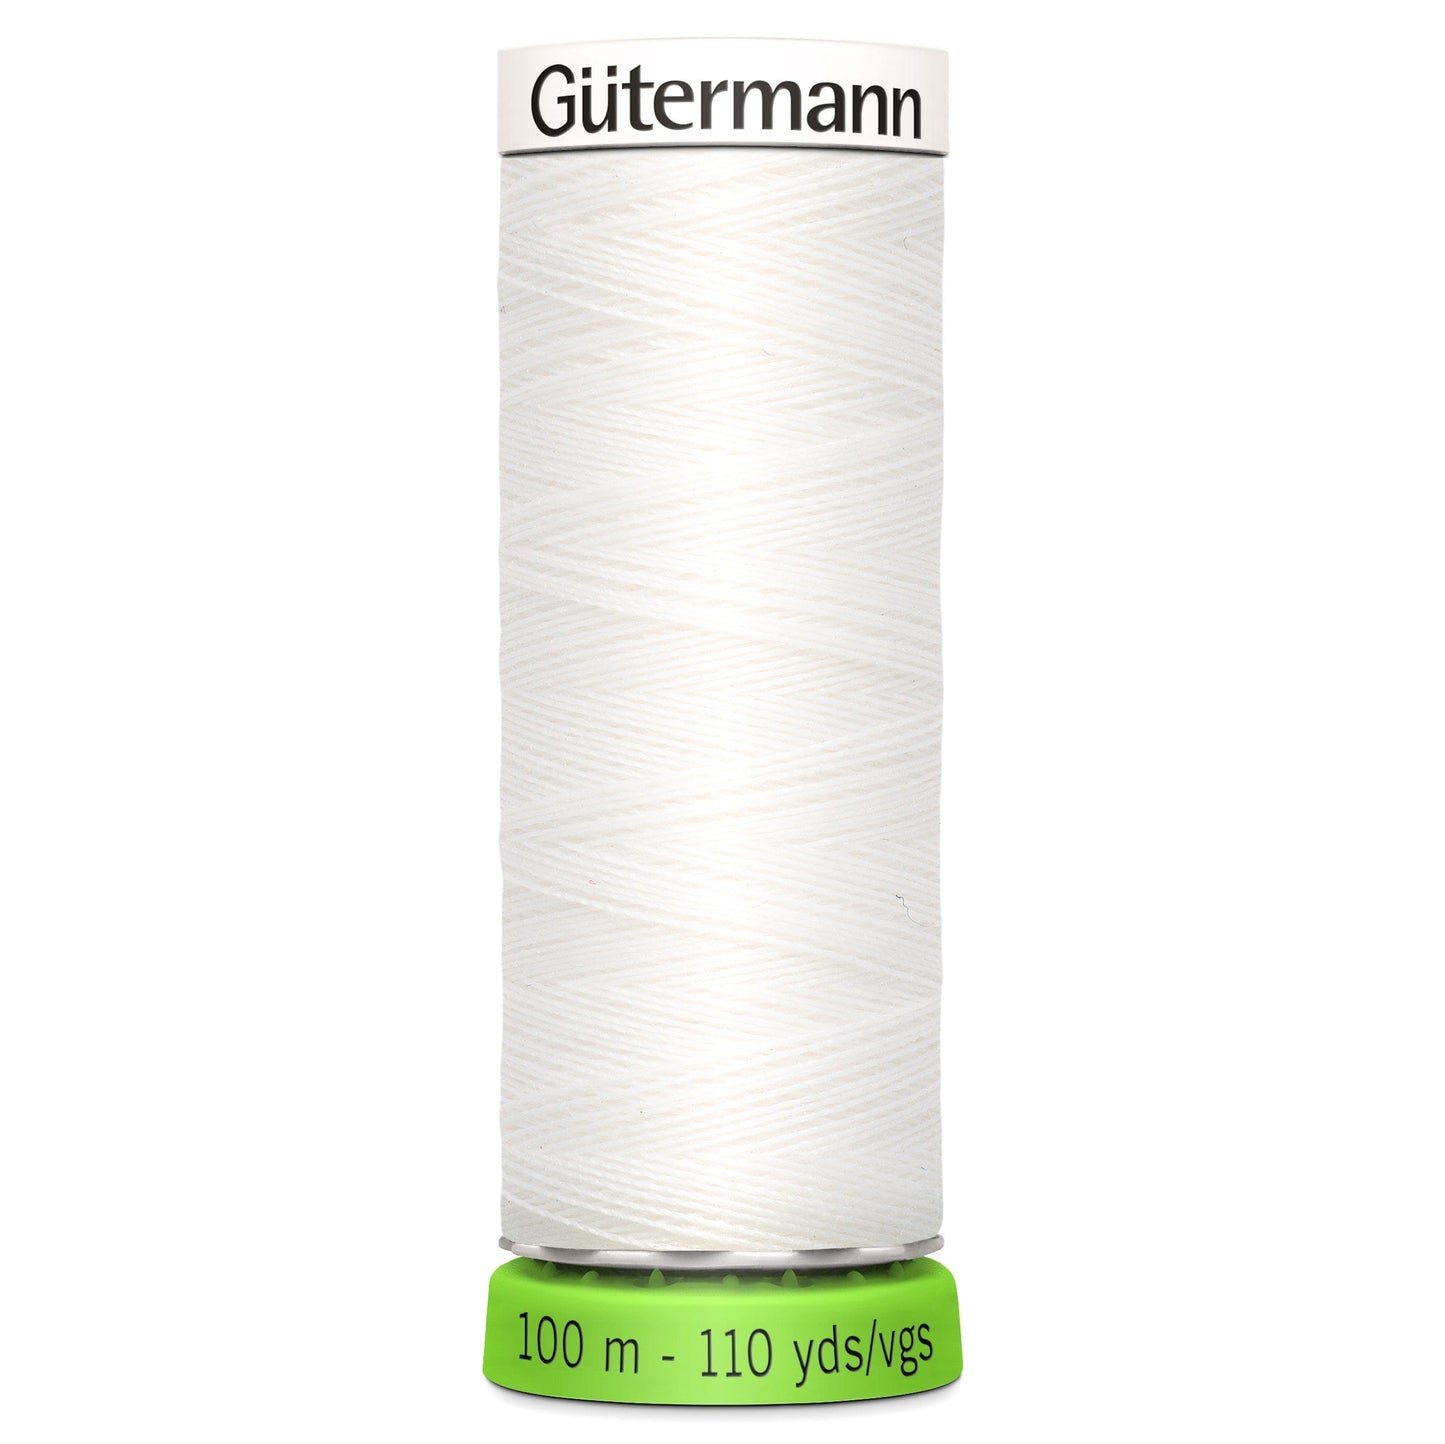 100 m Reel Gütermann Recycled Sew-All Thread in White, No. 800